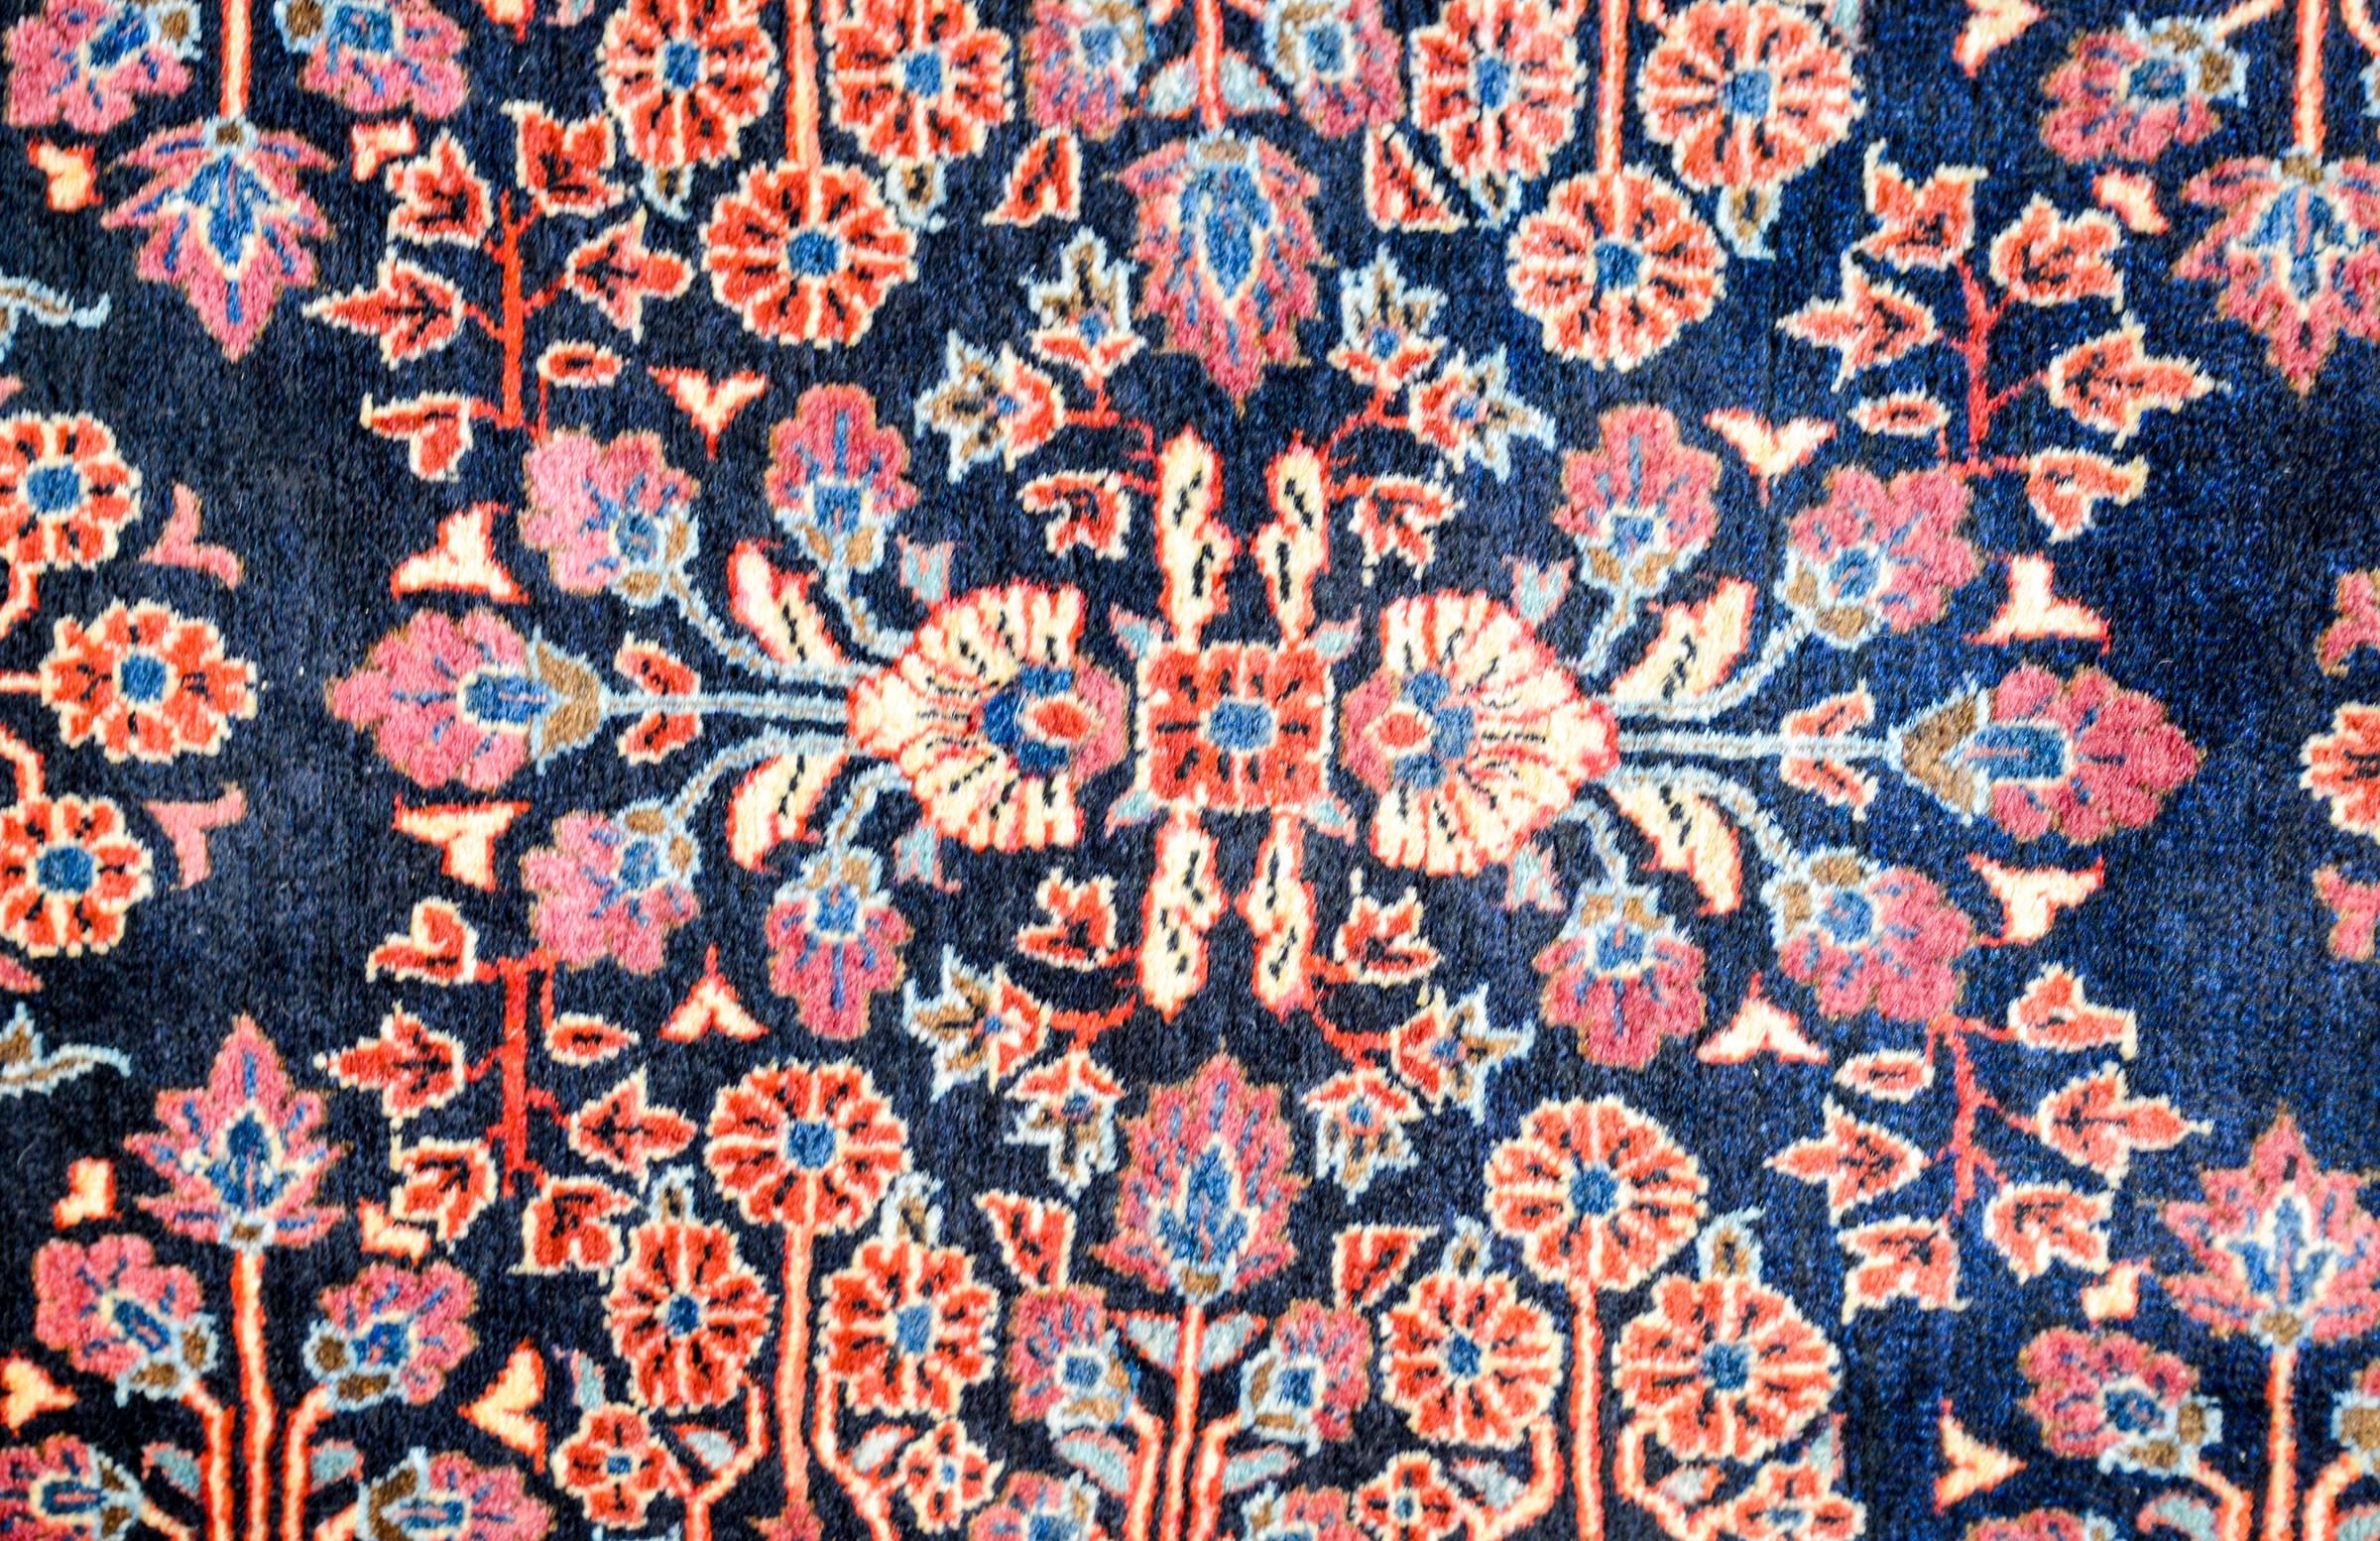 A Classic and wonderful early 20th century Persian Sarouk Mohajeran rug with a bold but traditional mirrored floral pattern woven in crimson, pink, light indigo, and gold, on a dark indigo background. The border is contrasting with a wide cranberry